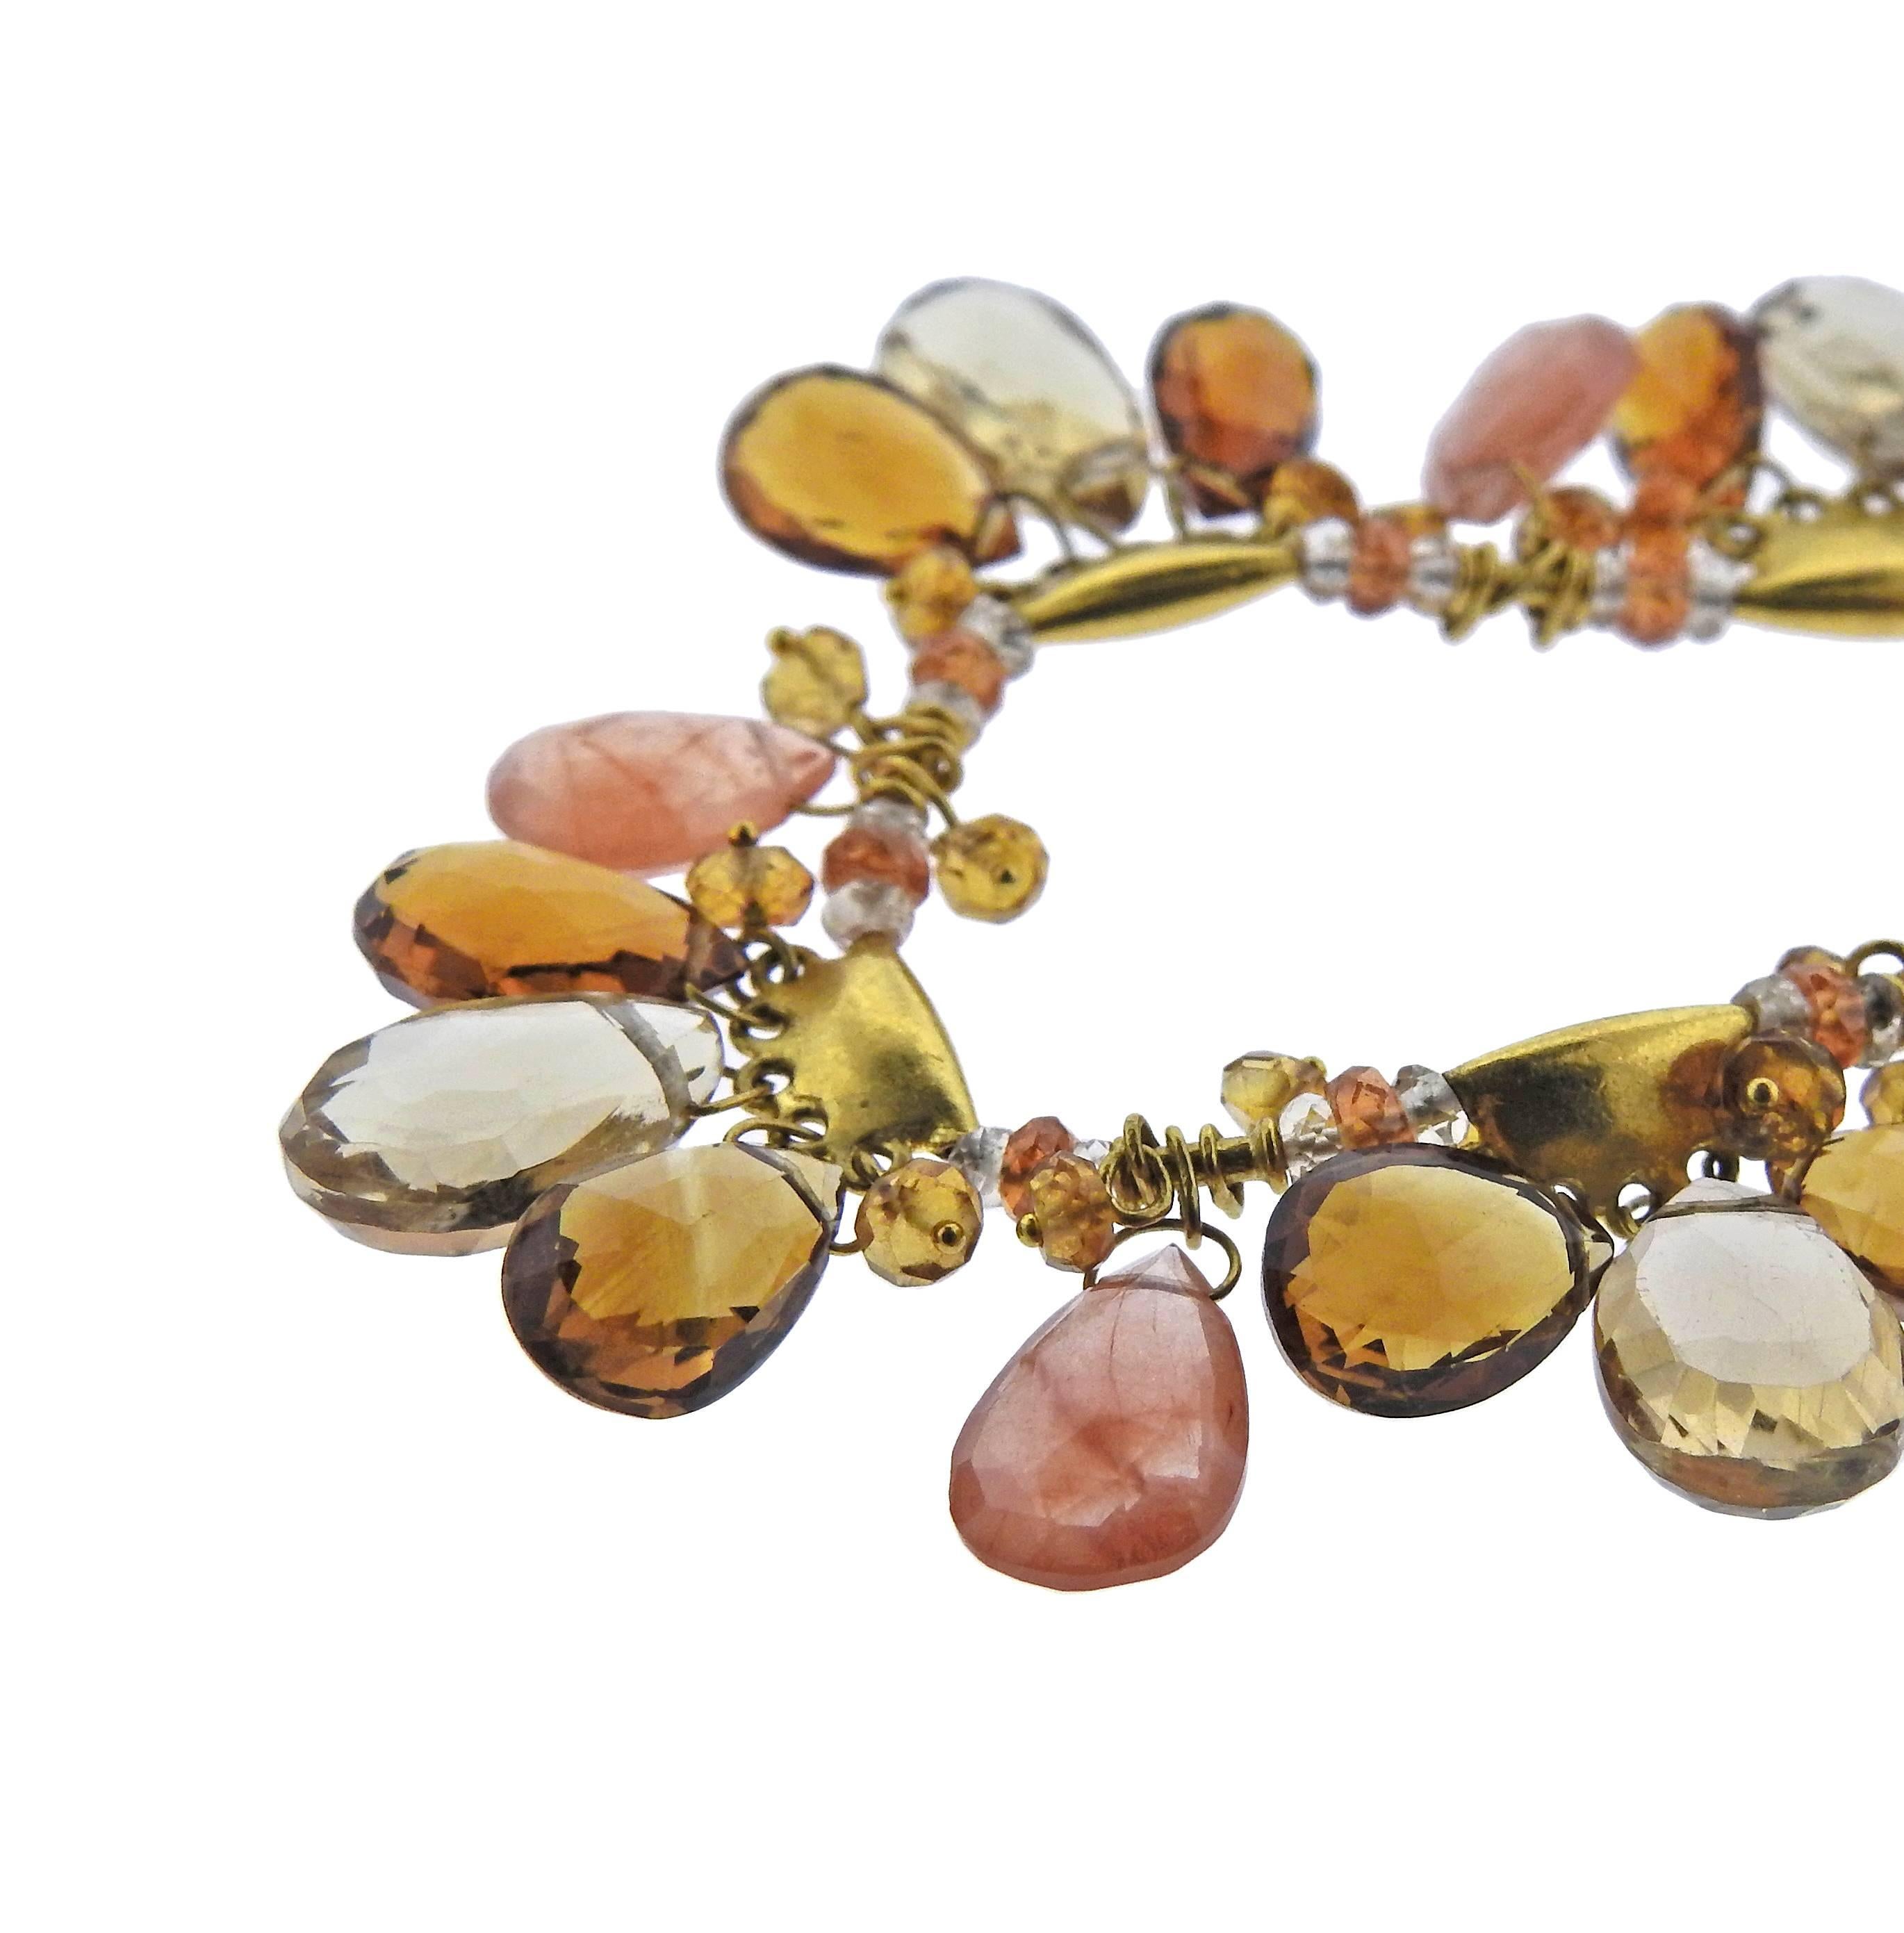 Stunning Gurhan 24K necklace from the Confetti collection featuring Multi Color Gemstones briolettes (Citrines, Garnets, Peach Moonstones, Etc.). Necklace Up To 17